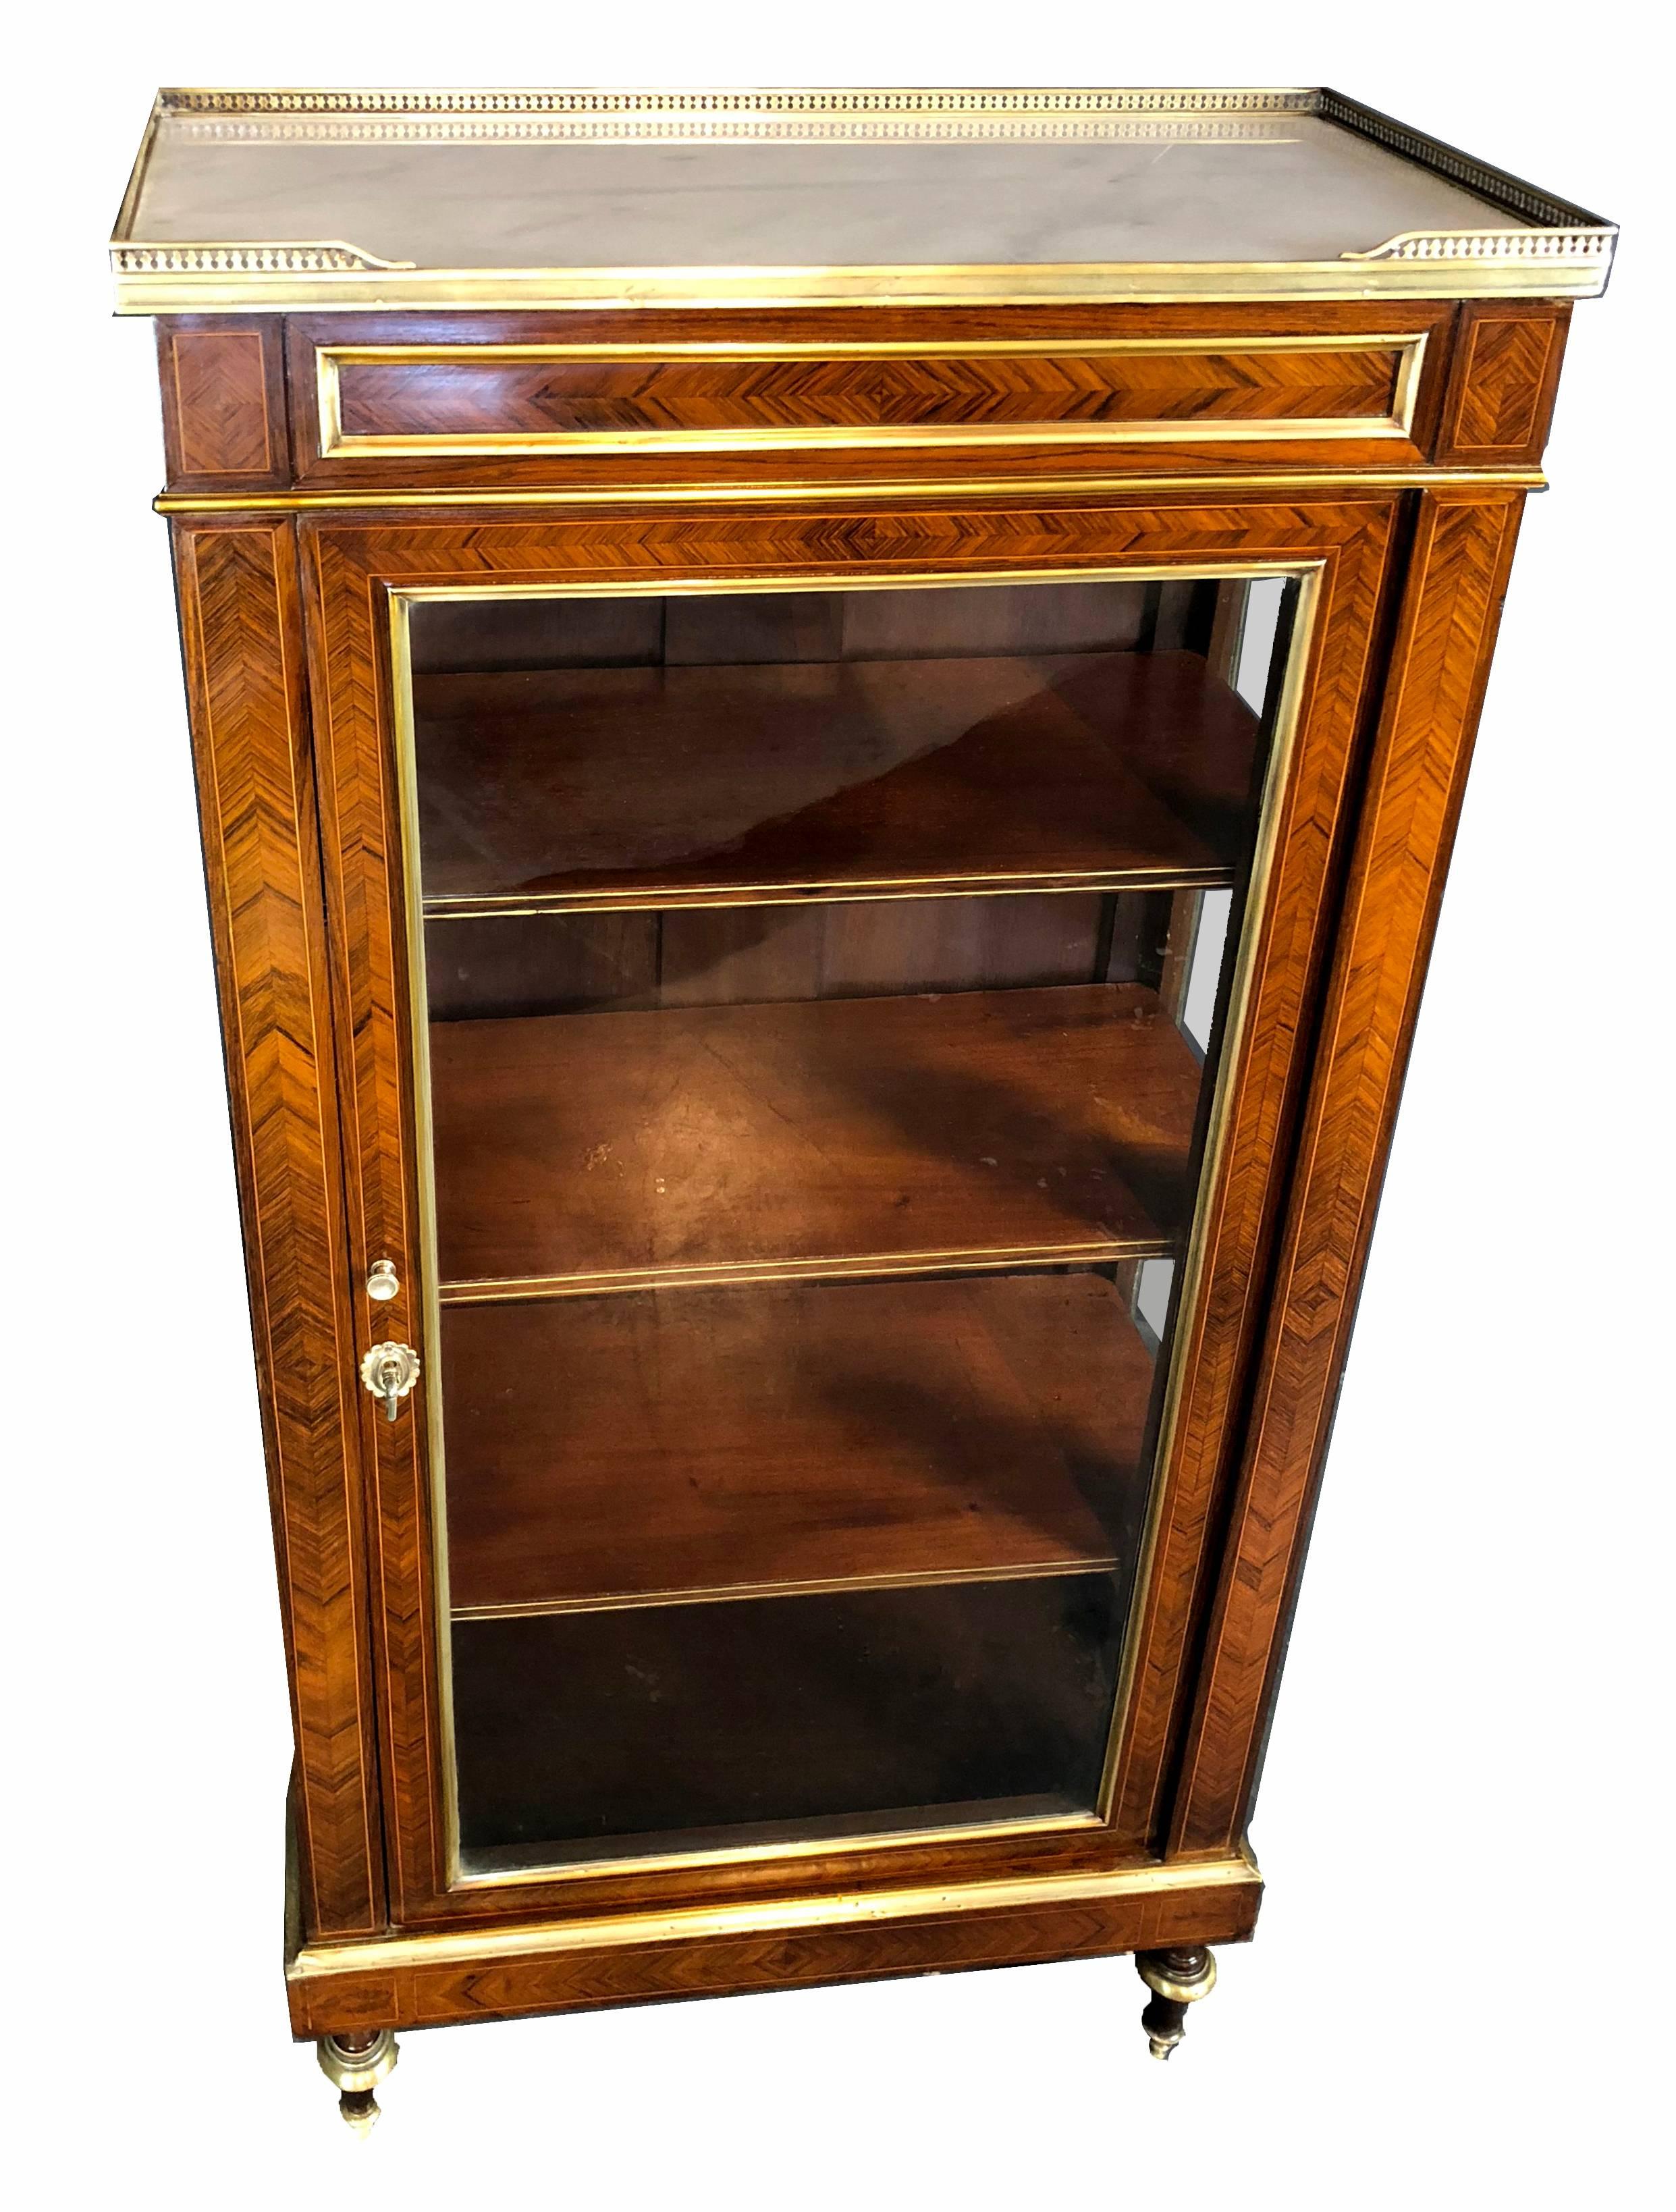 Fine and rare end of 18th century period French Directoire petite vitrine with exquisite herringbone kingwood veneers with line inlays, adorned by gilt bronze mouldings throughout. The top with characteristic white marble is surrounded by a brass